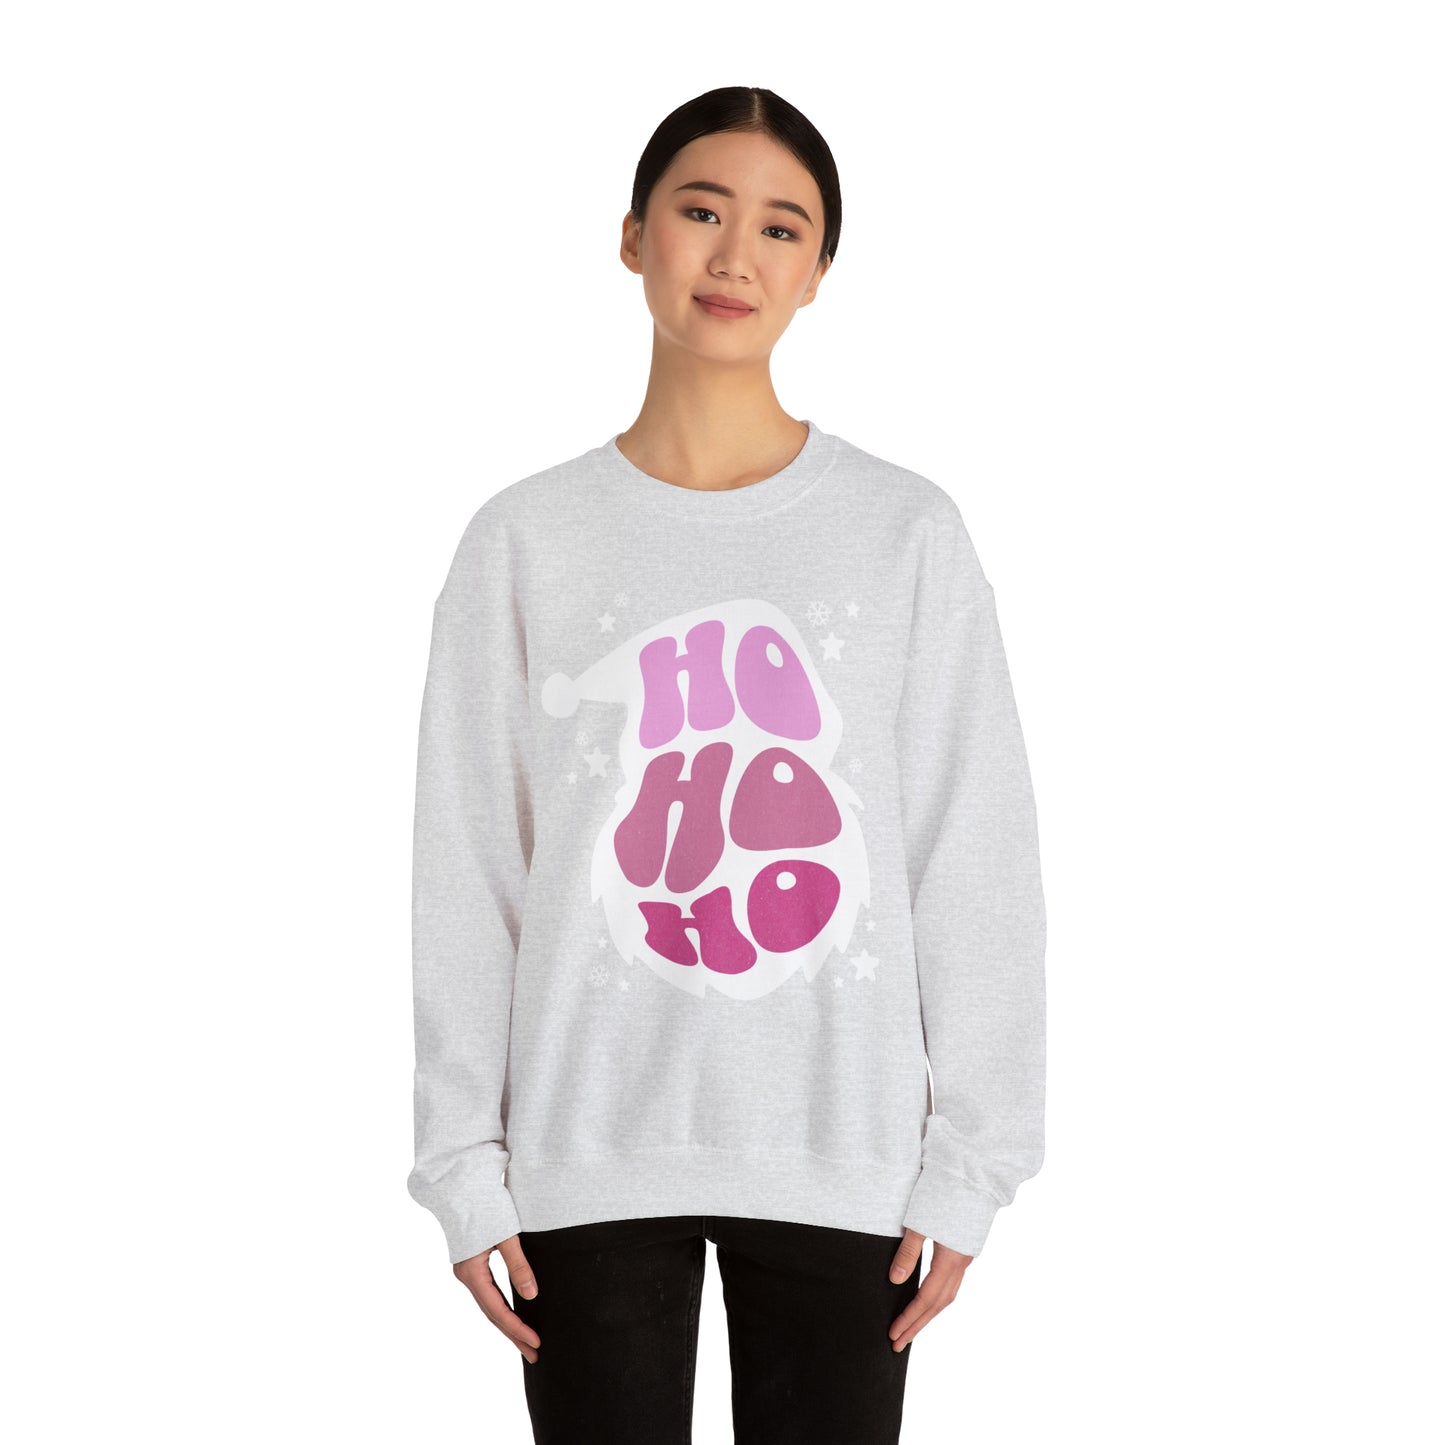 A woman wearing a comfortable Ho Ho Ho Santa Outline Pink Holiday Sweatshirt - Cozy Crewneck - Festive Christmas Sweate sweatshirt with the word 'oh' on it from Printify.